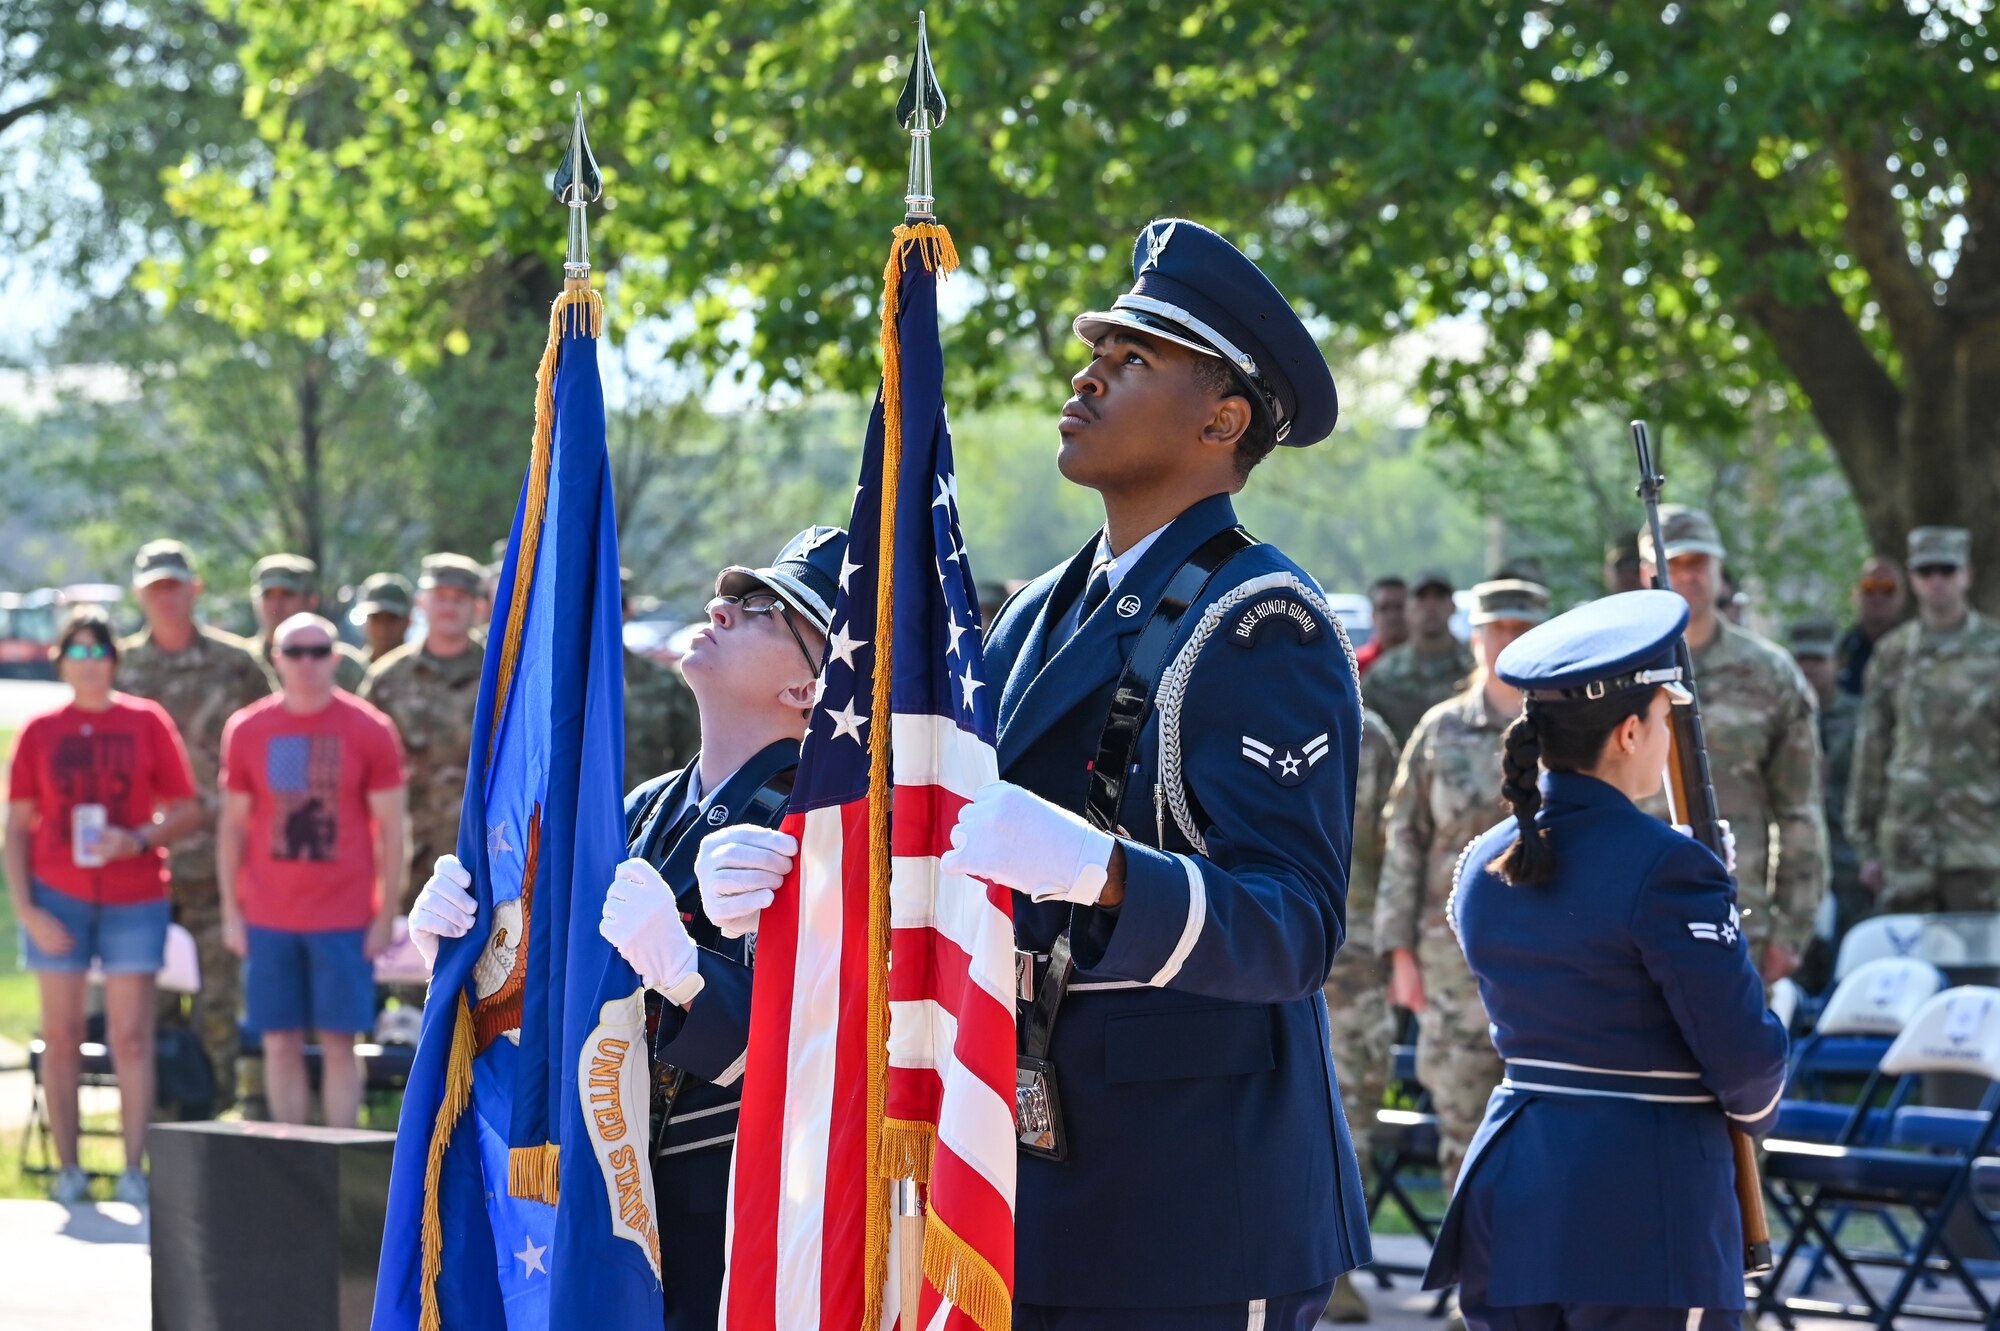 Honor Guard members Airman 1st Class Tamika Allen (left) and Airman 1st Class Mikah McNeal post the colors at the 9/11 Memorial Ceremony Sept. 9, 2022